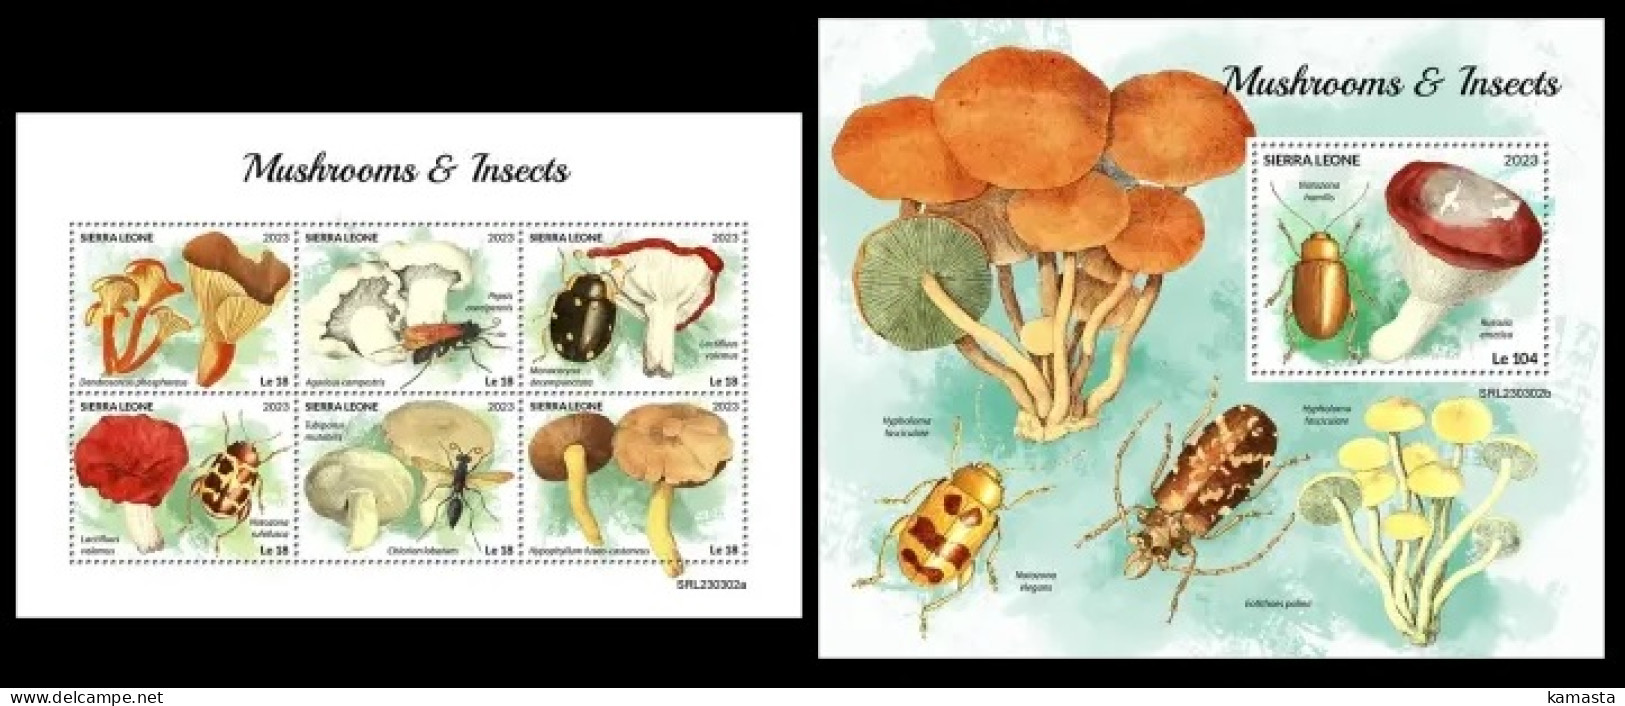 Sierra Leone  2023 Mushrooms & Insects. (302) OFFICIAL ISSUE - Champignons